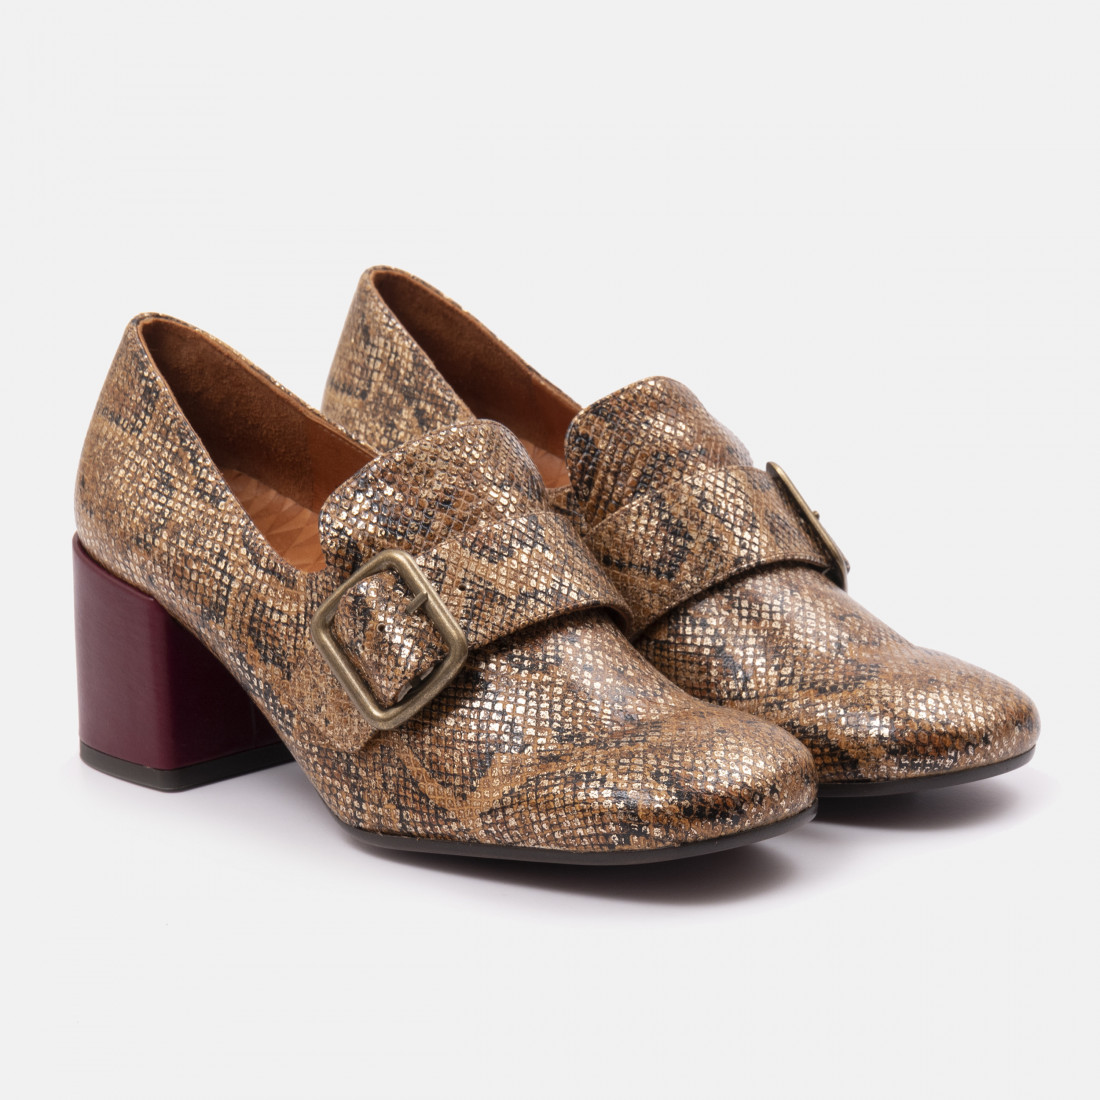 Chie Mihara Urchin sand moccasin in python-print leather